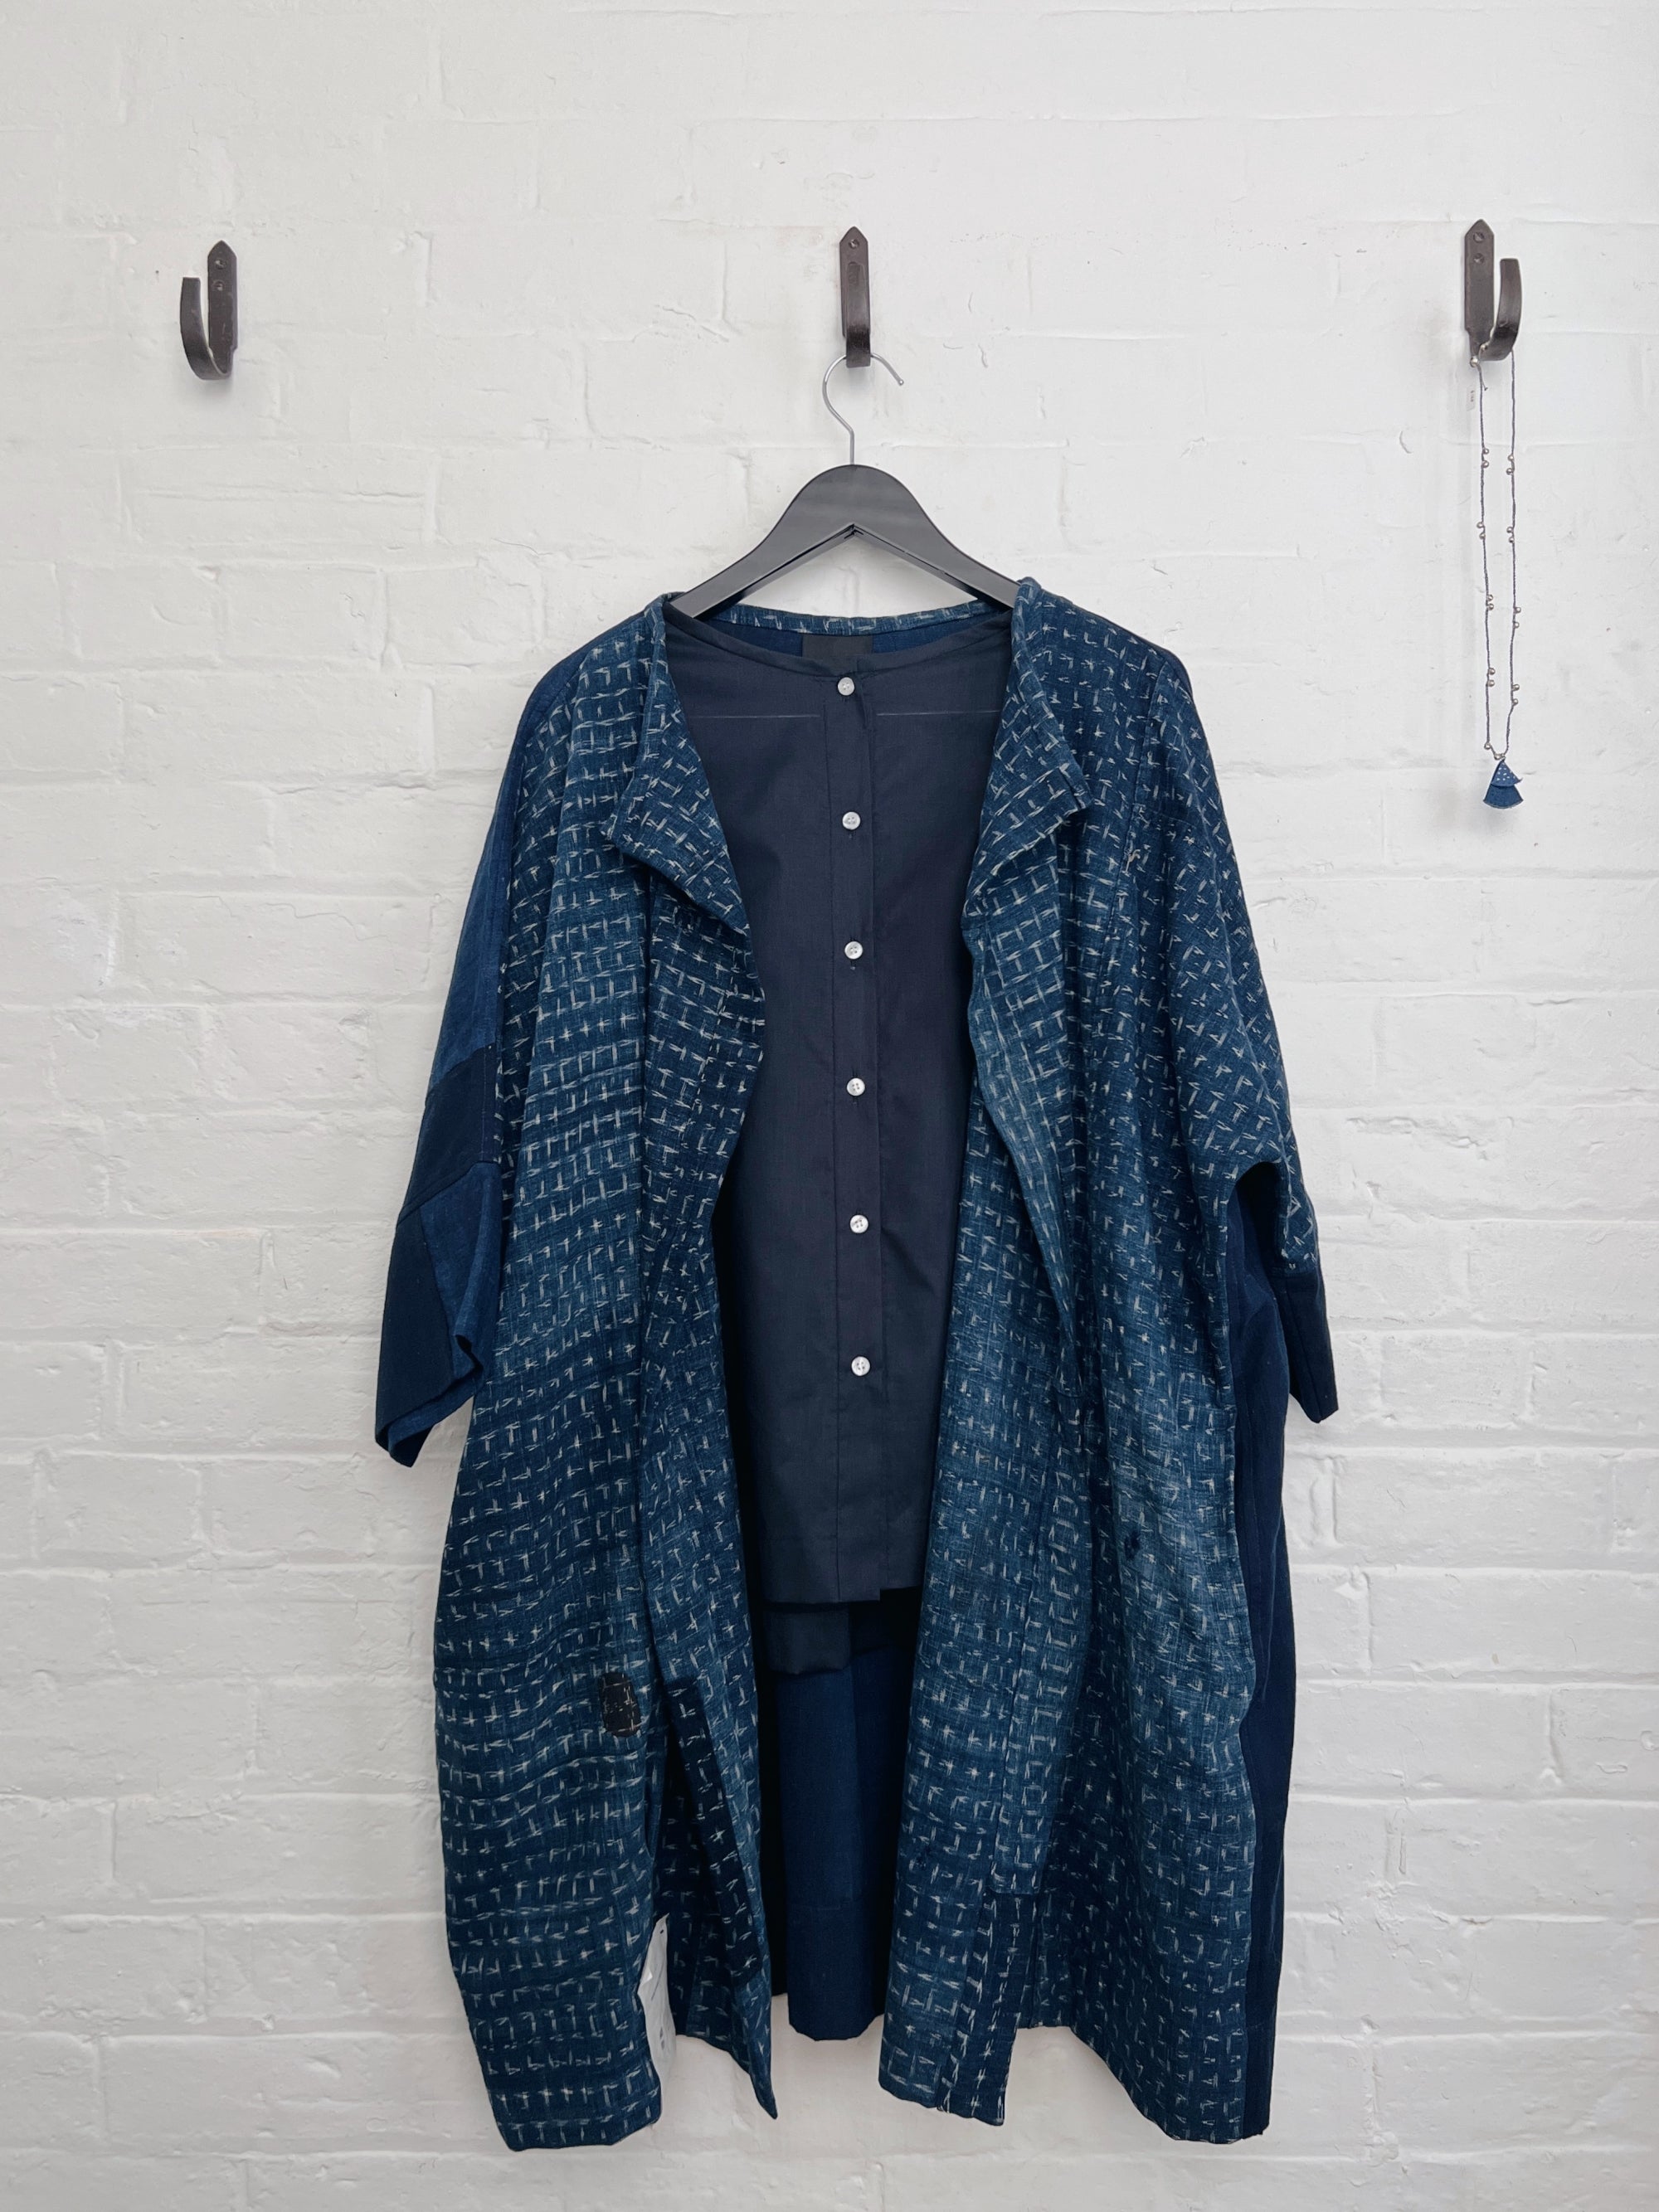 LJ struthers : vintage cotton gallery duster